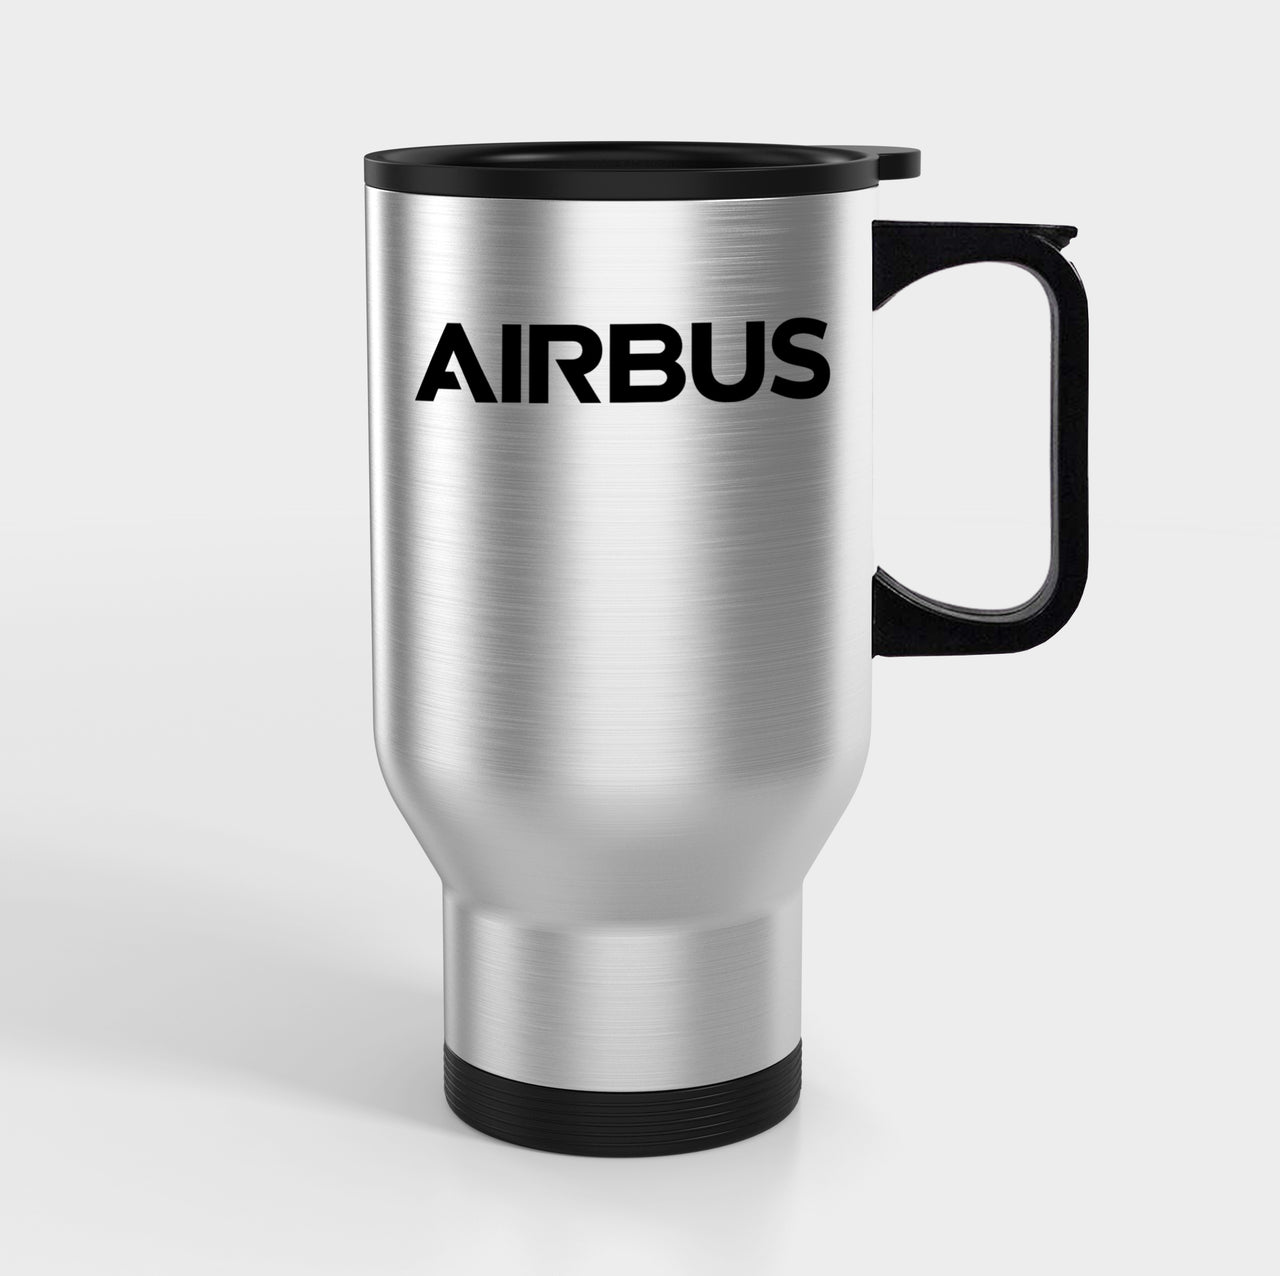 Airbus & Text Designed Travel Mugs (With Holder)